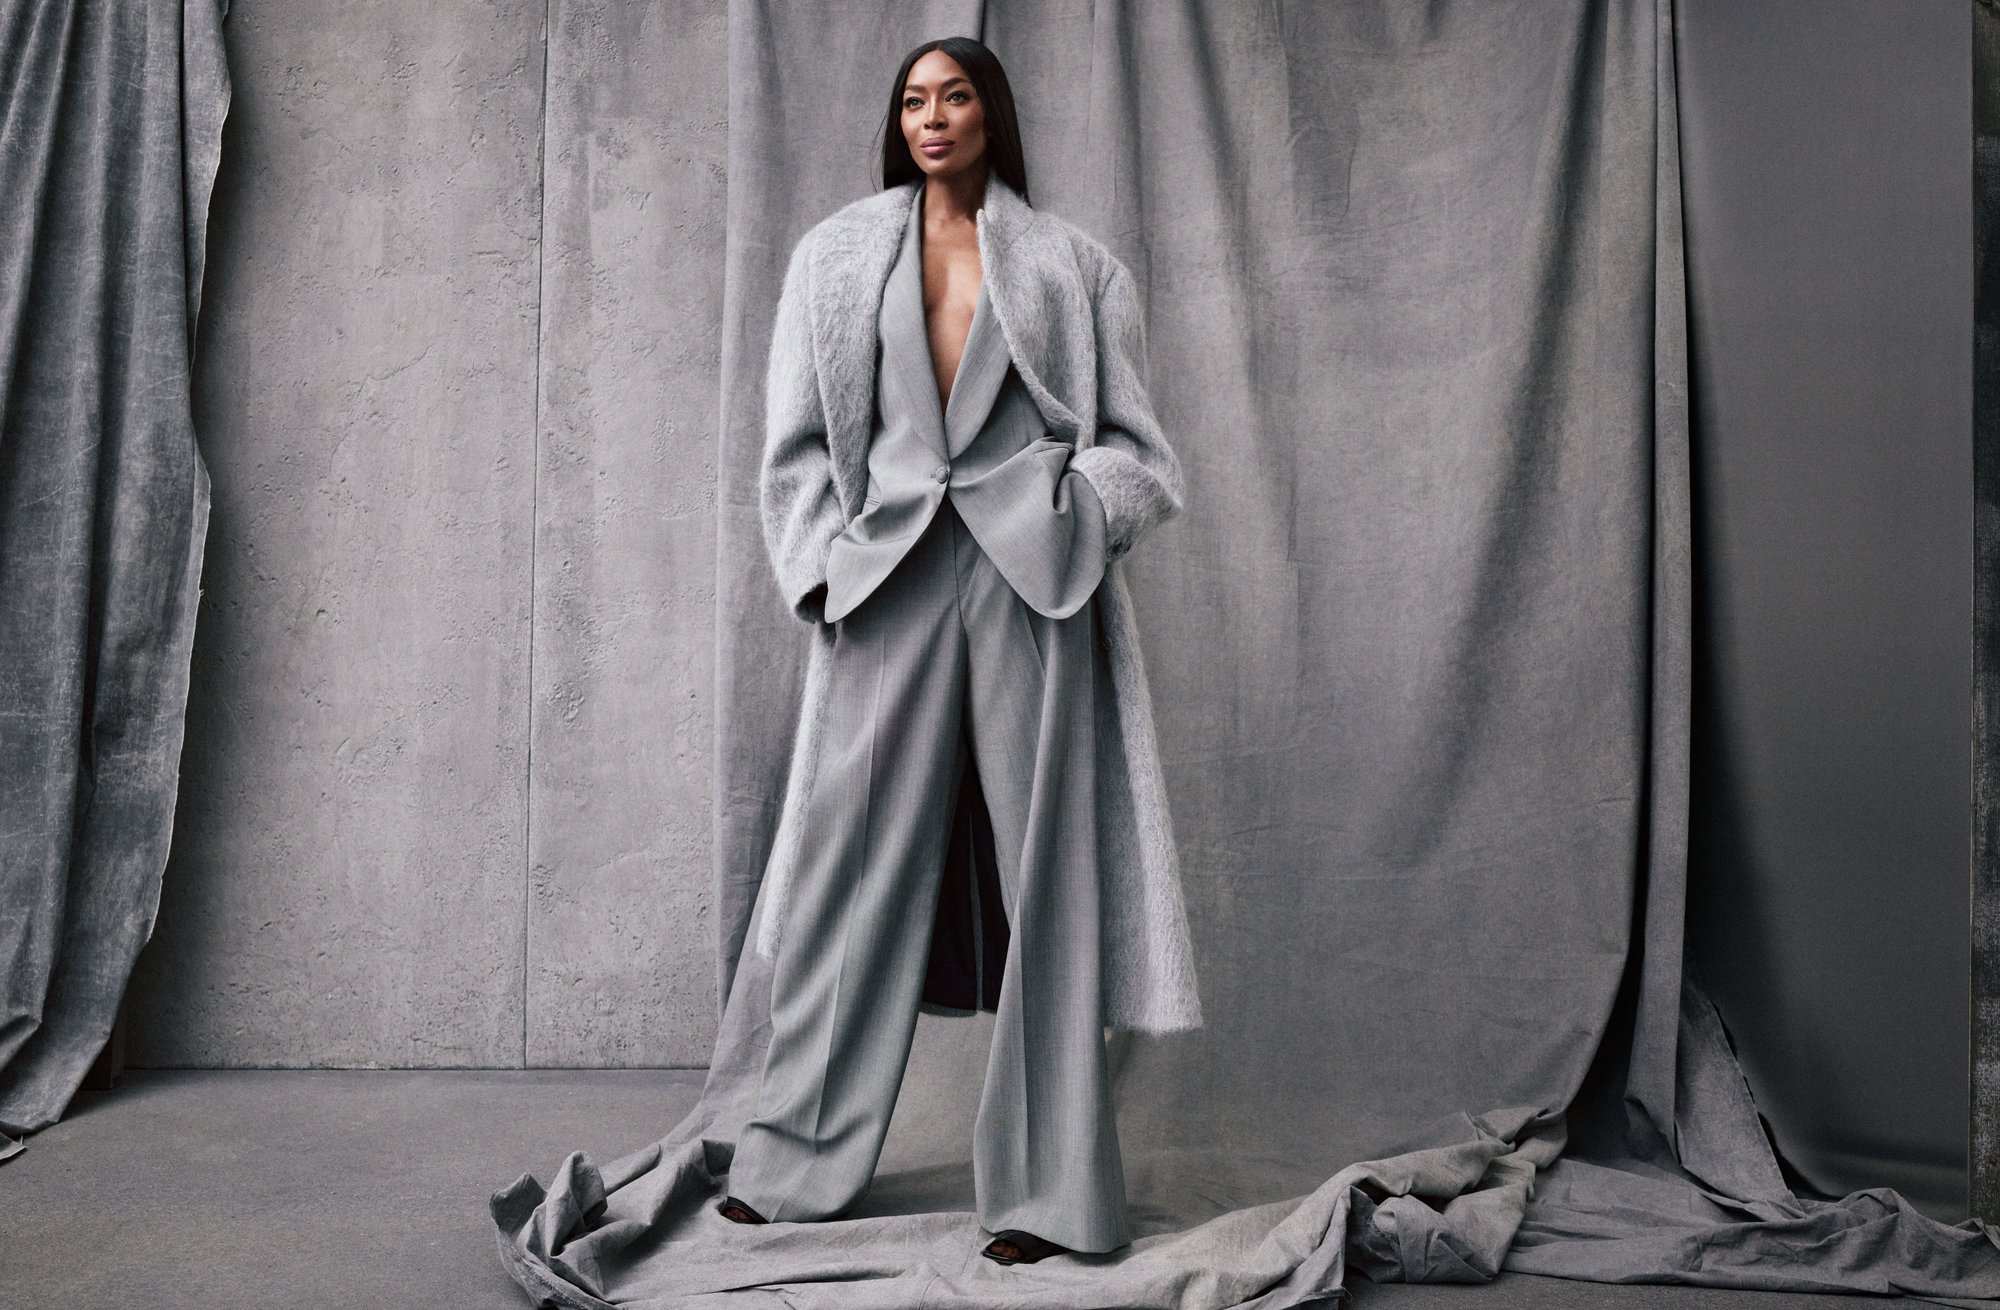 BOSS_FW23_Global_Campaign_Naomi_Campbell_001__image-mid-res.jpeg